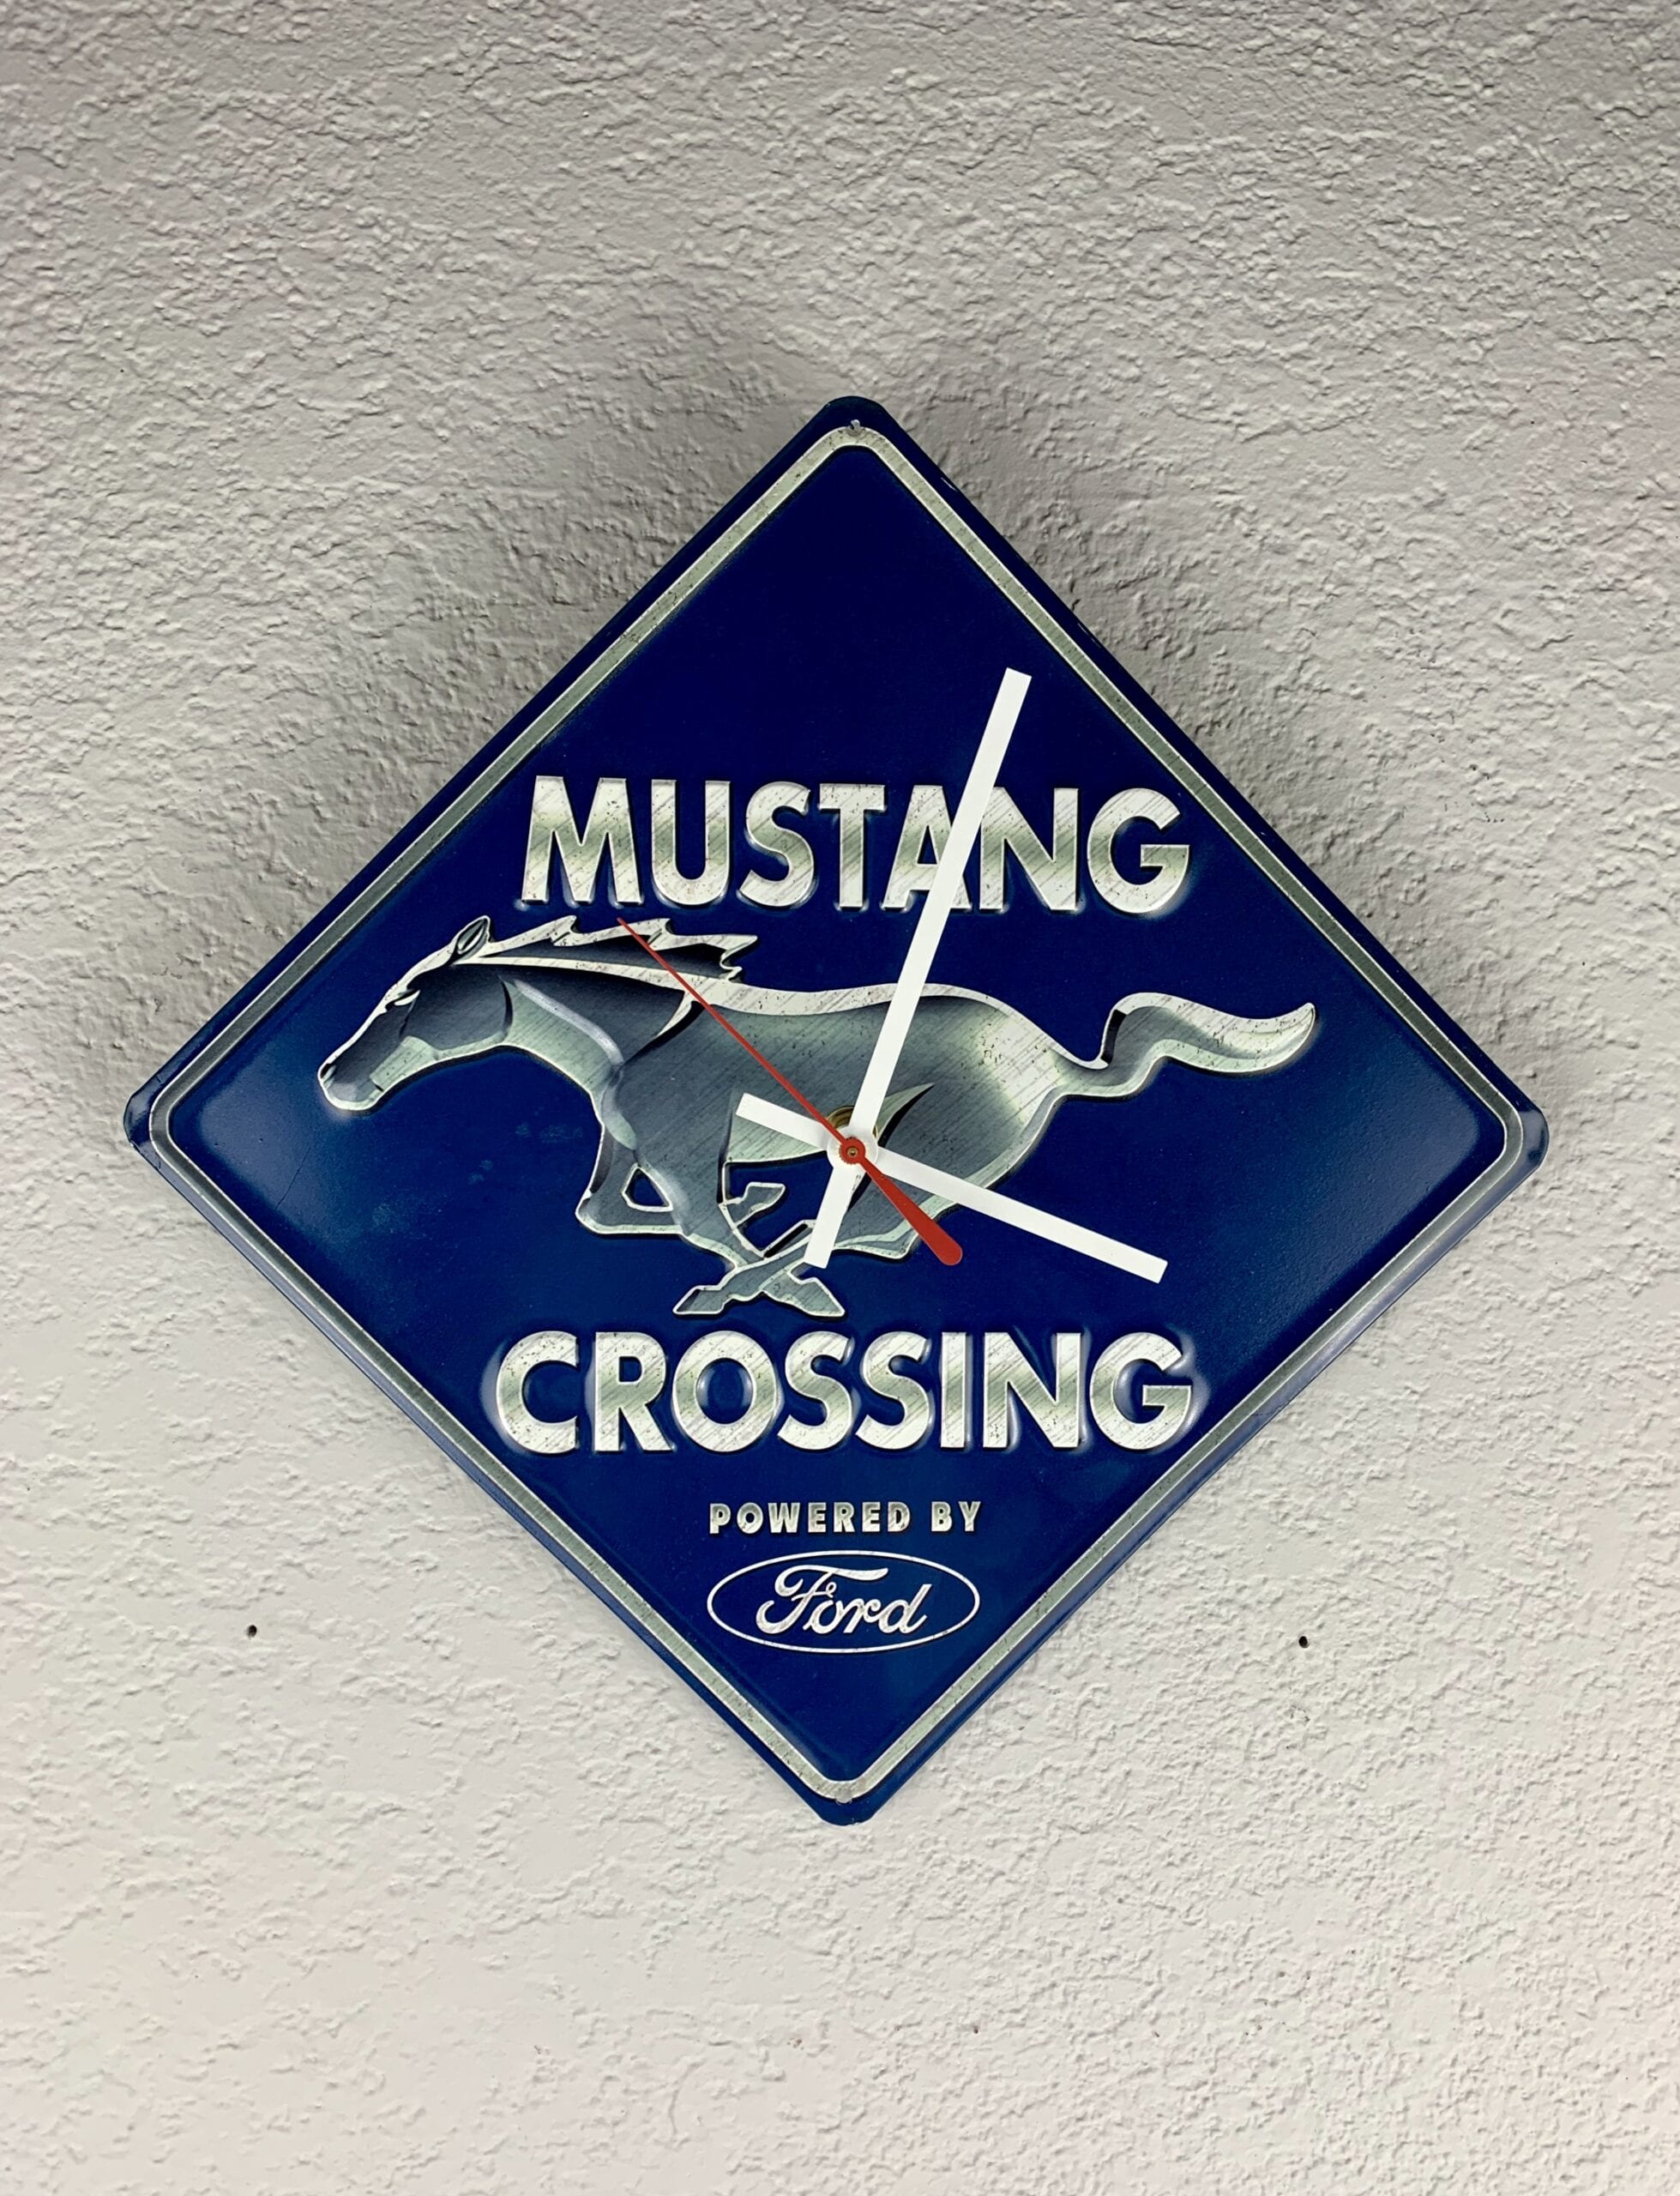 Ford Mustang Metal Sign Wall Clock on grey wall